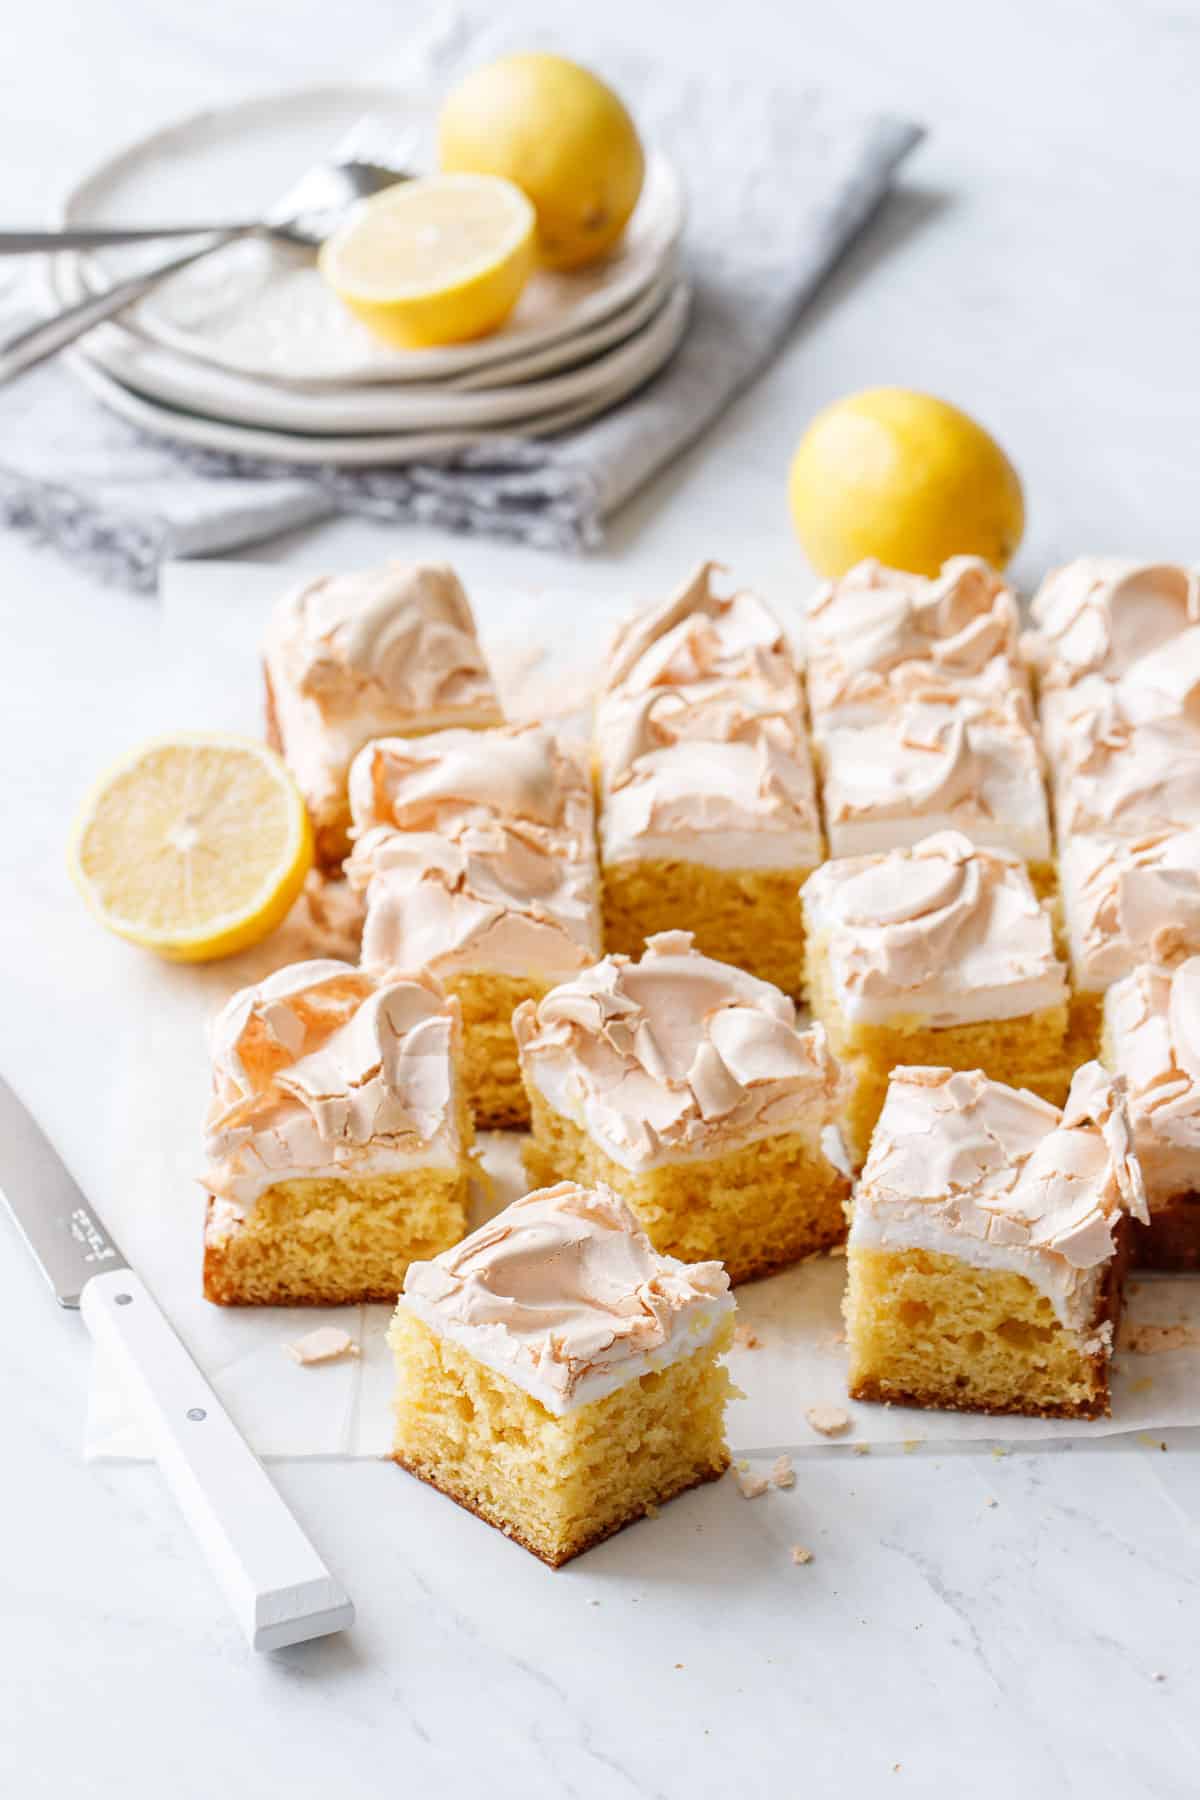 Lemon Meringue Butter Cake cut into squares on a piece of parchment on marble, with a knife, lemons and stack of plates in the background.